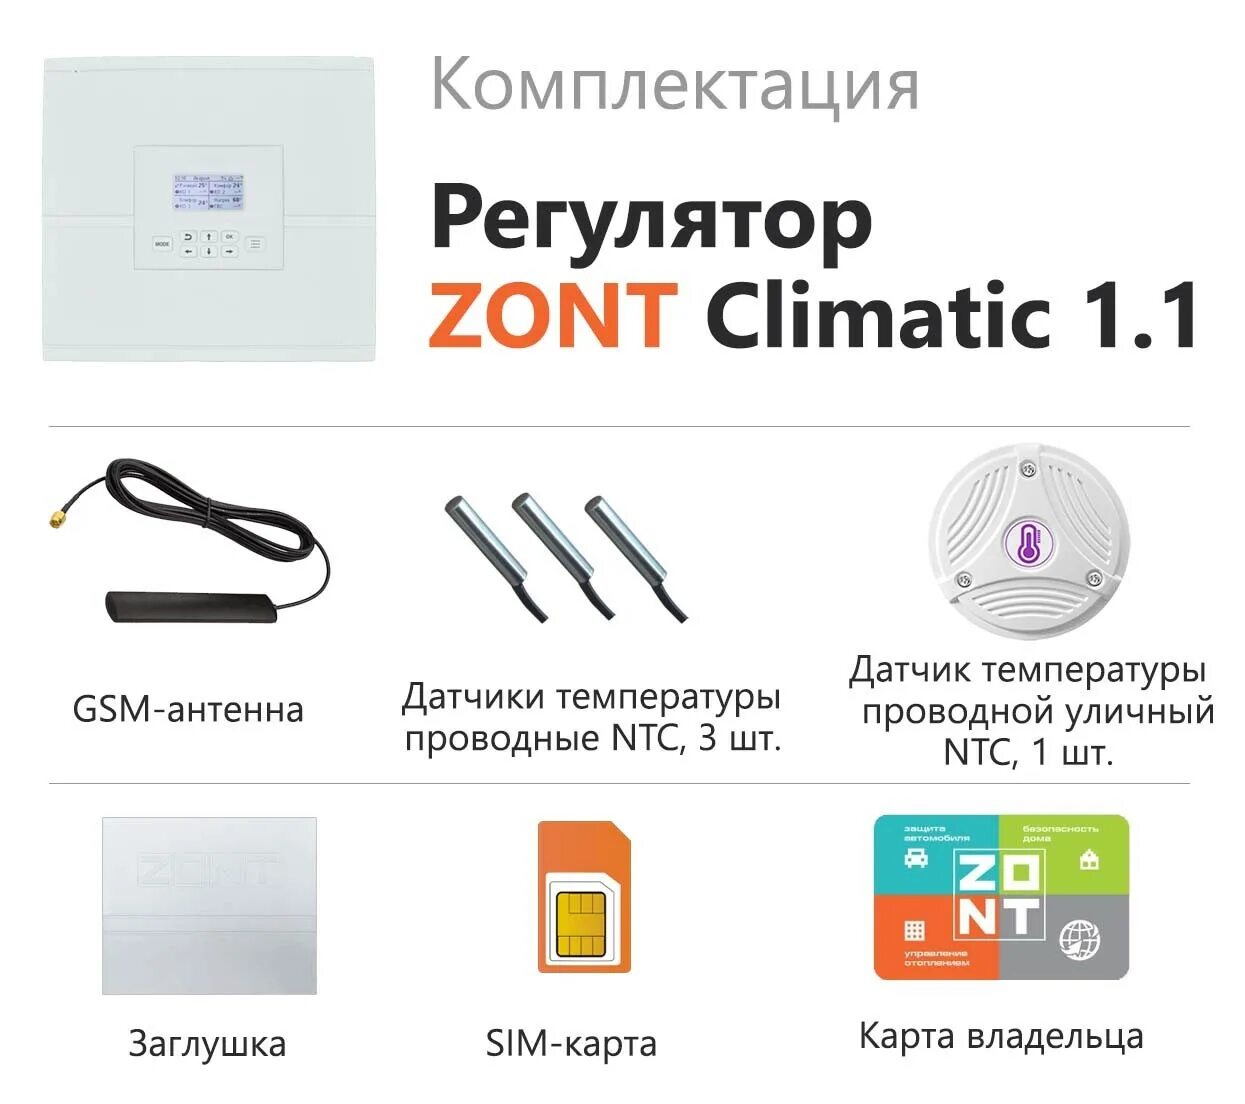 Zont климатик 1.3. Zont climatic 1.2. Zont climatic 1.3 автоматический регулятор. Автоматический регулятор Zont climatic 1.2. Zont карта